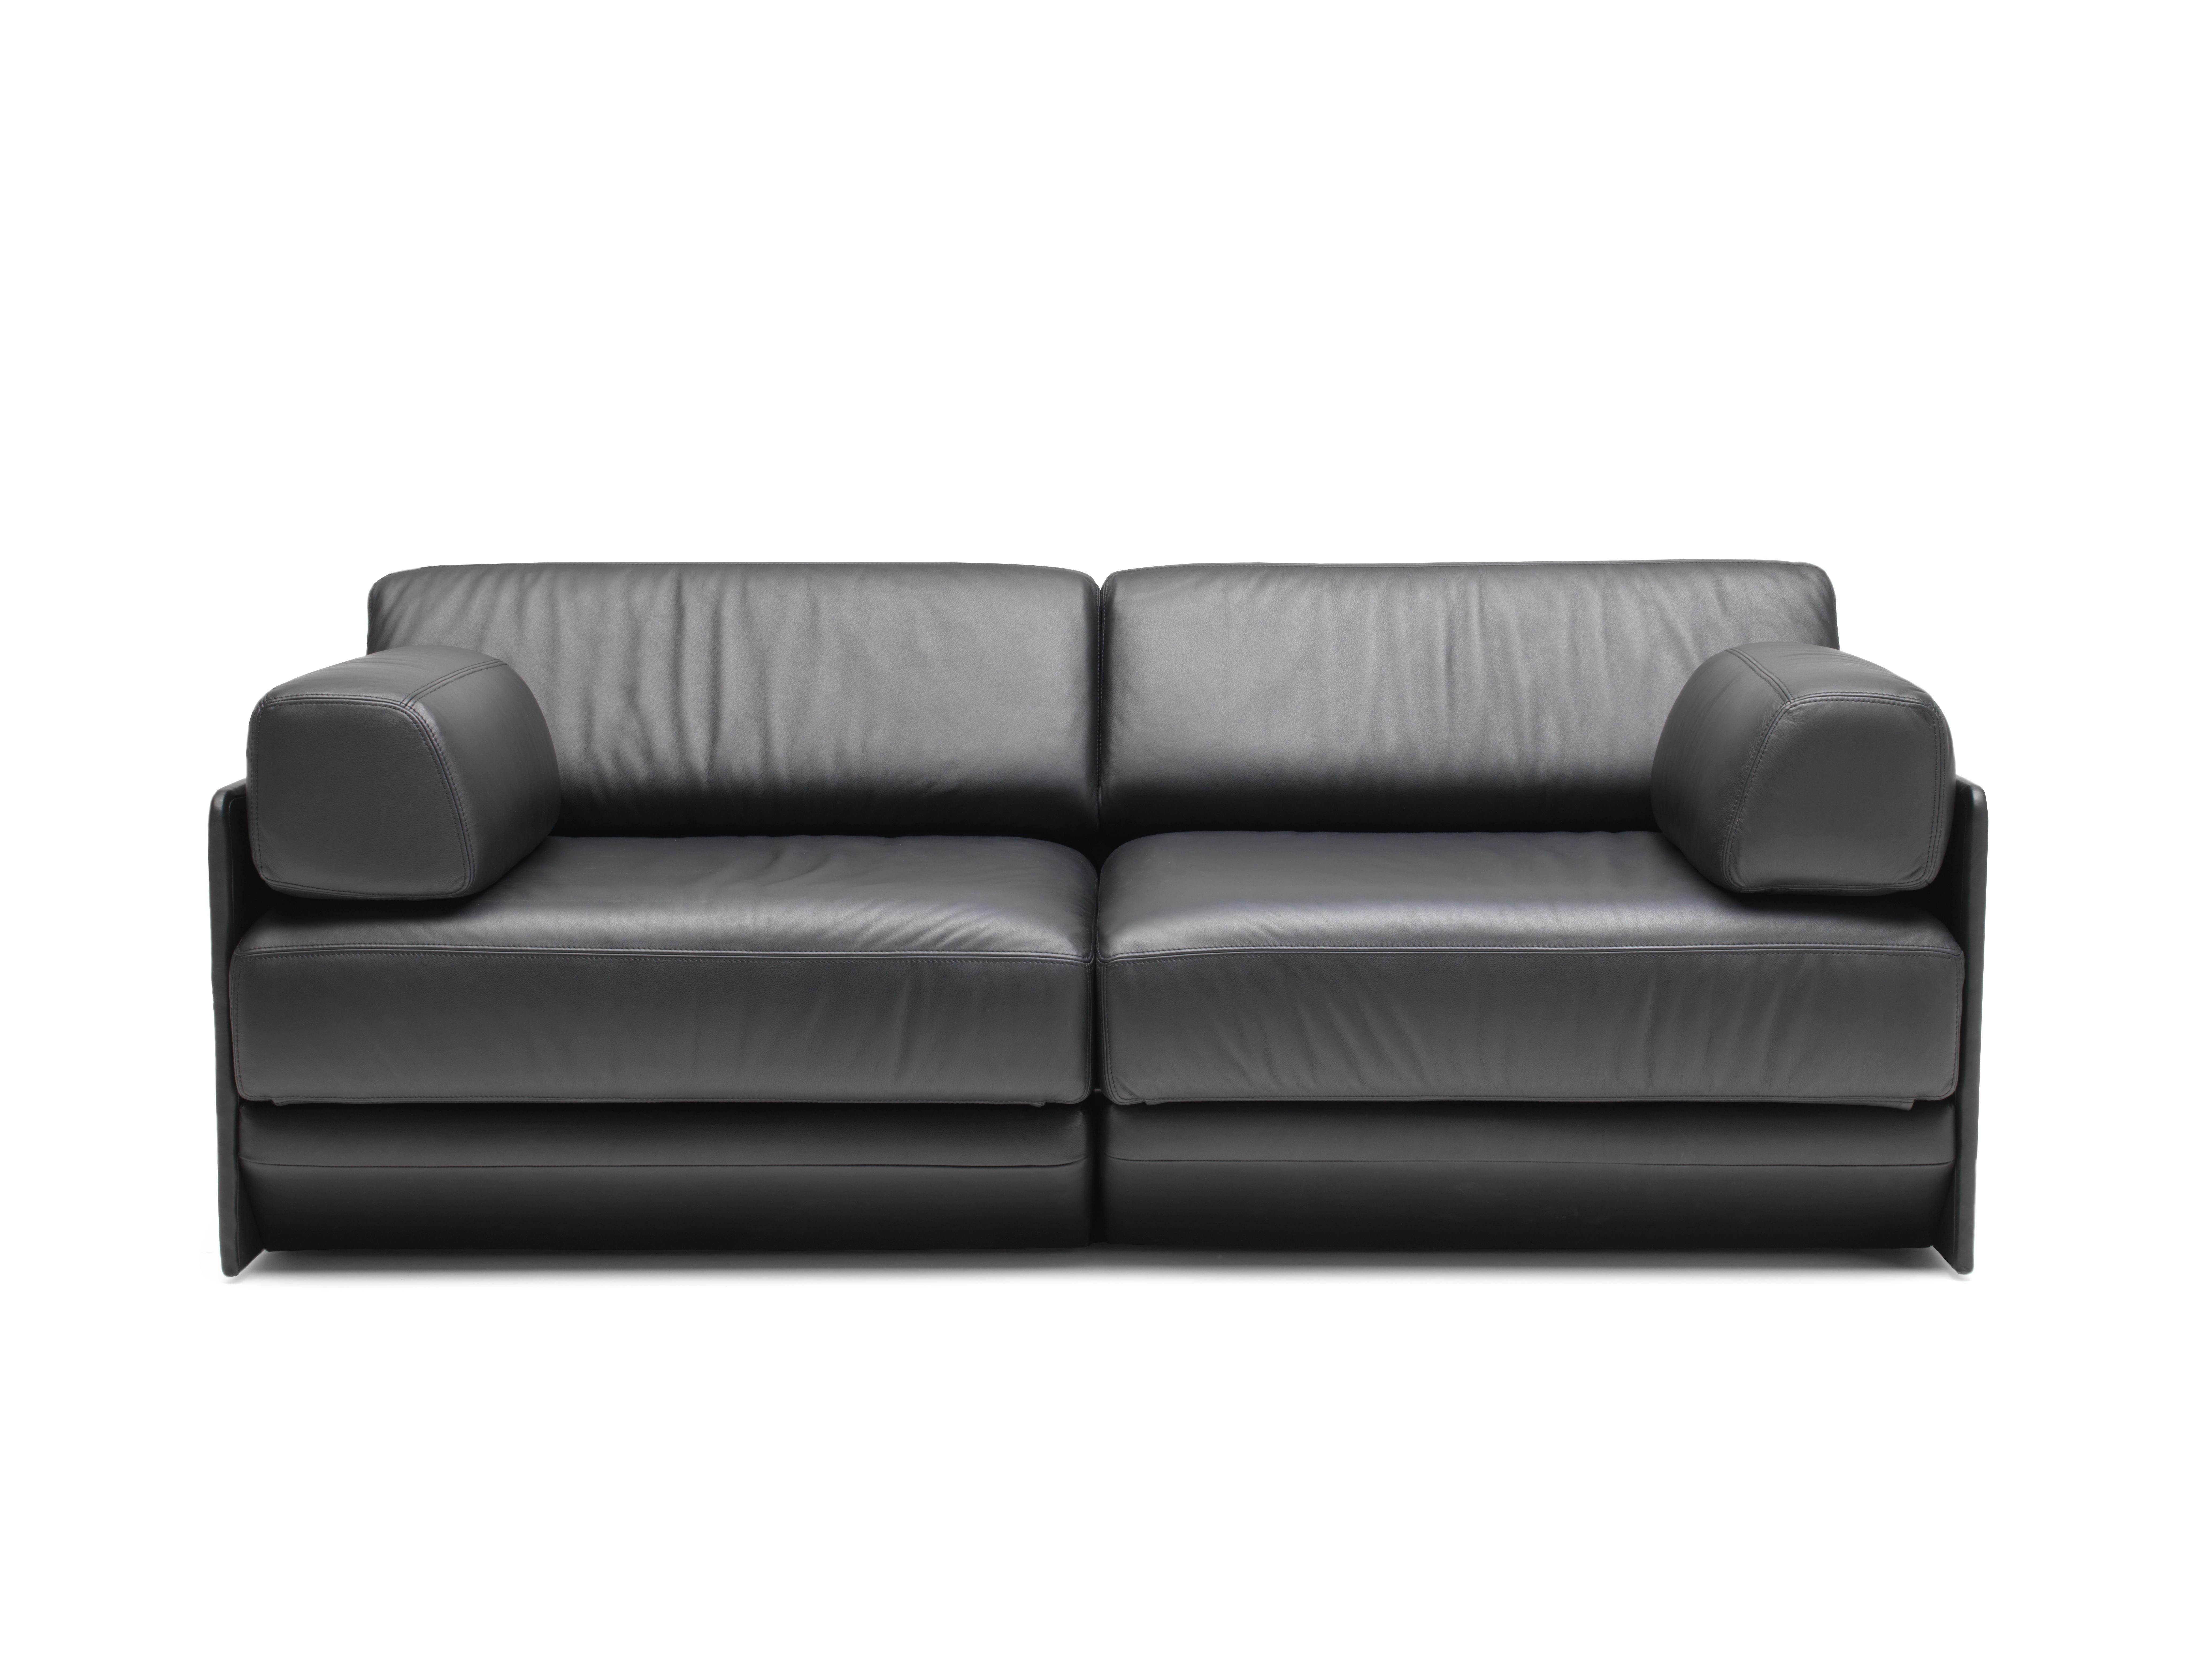 DS-76 Sofa / Bed by De Sede
Dimensions: D 66 x W 188 x H 53 cm, with bed extension W 225
Materials: Belted spring suspension on seat frame made of solid beech, leather.

Prices may change according to the chosen materials and size. 

A special